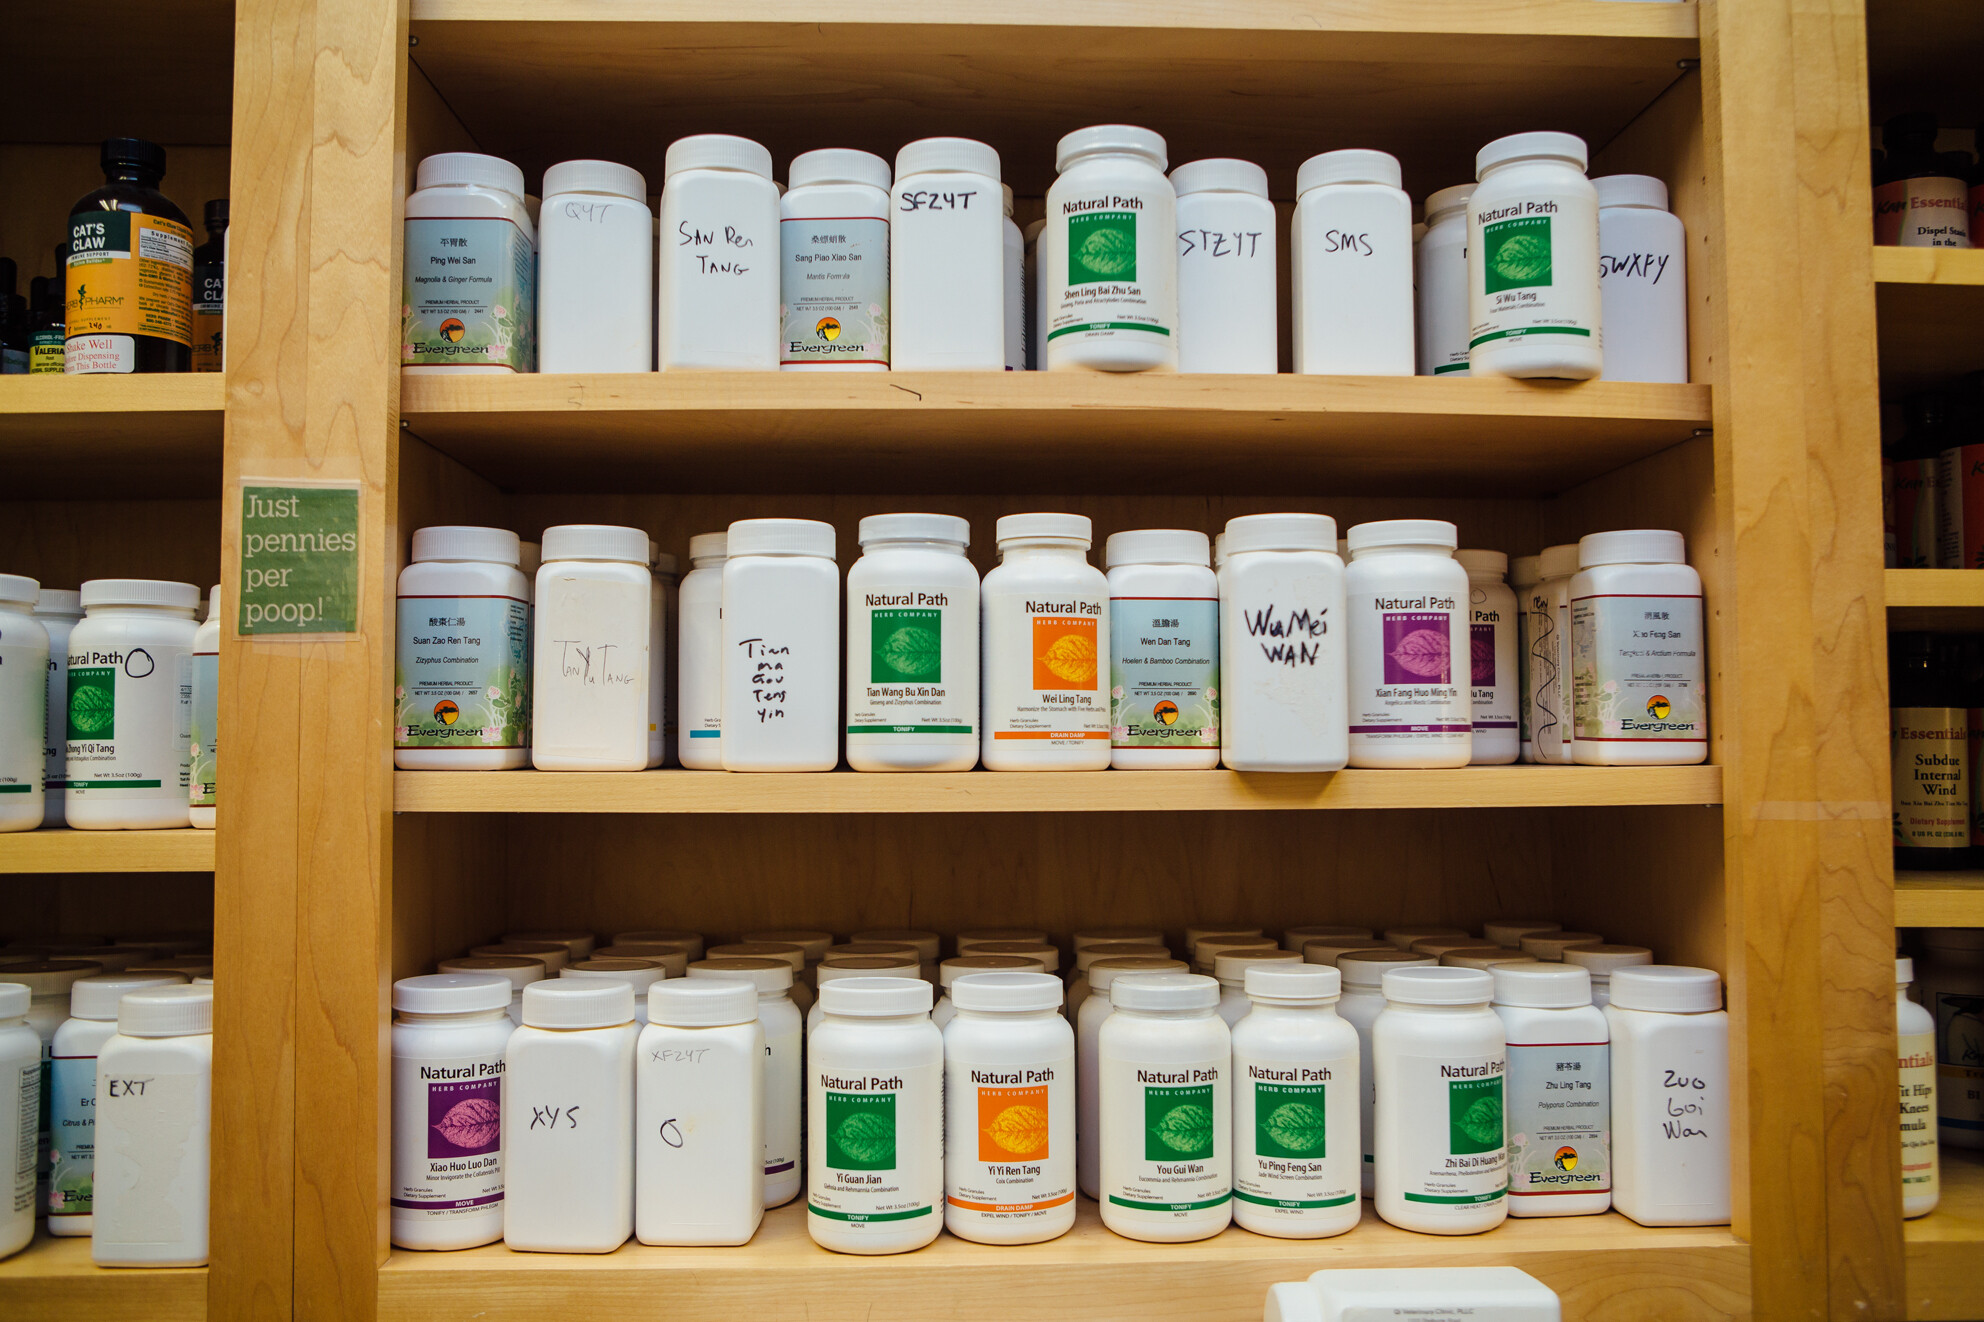 Shelving Filled With Bottles of Herbal Supplements